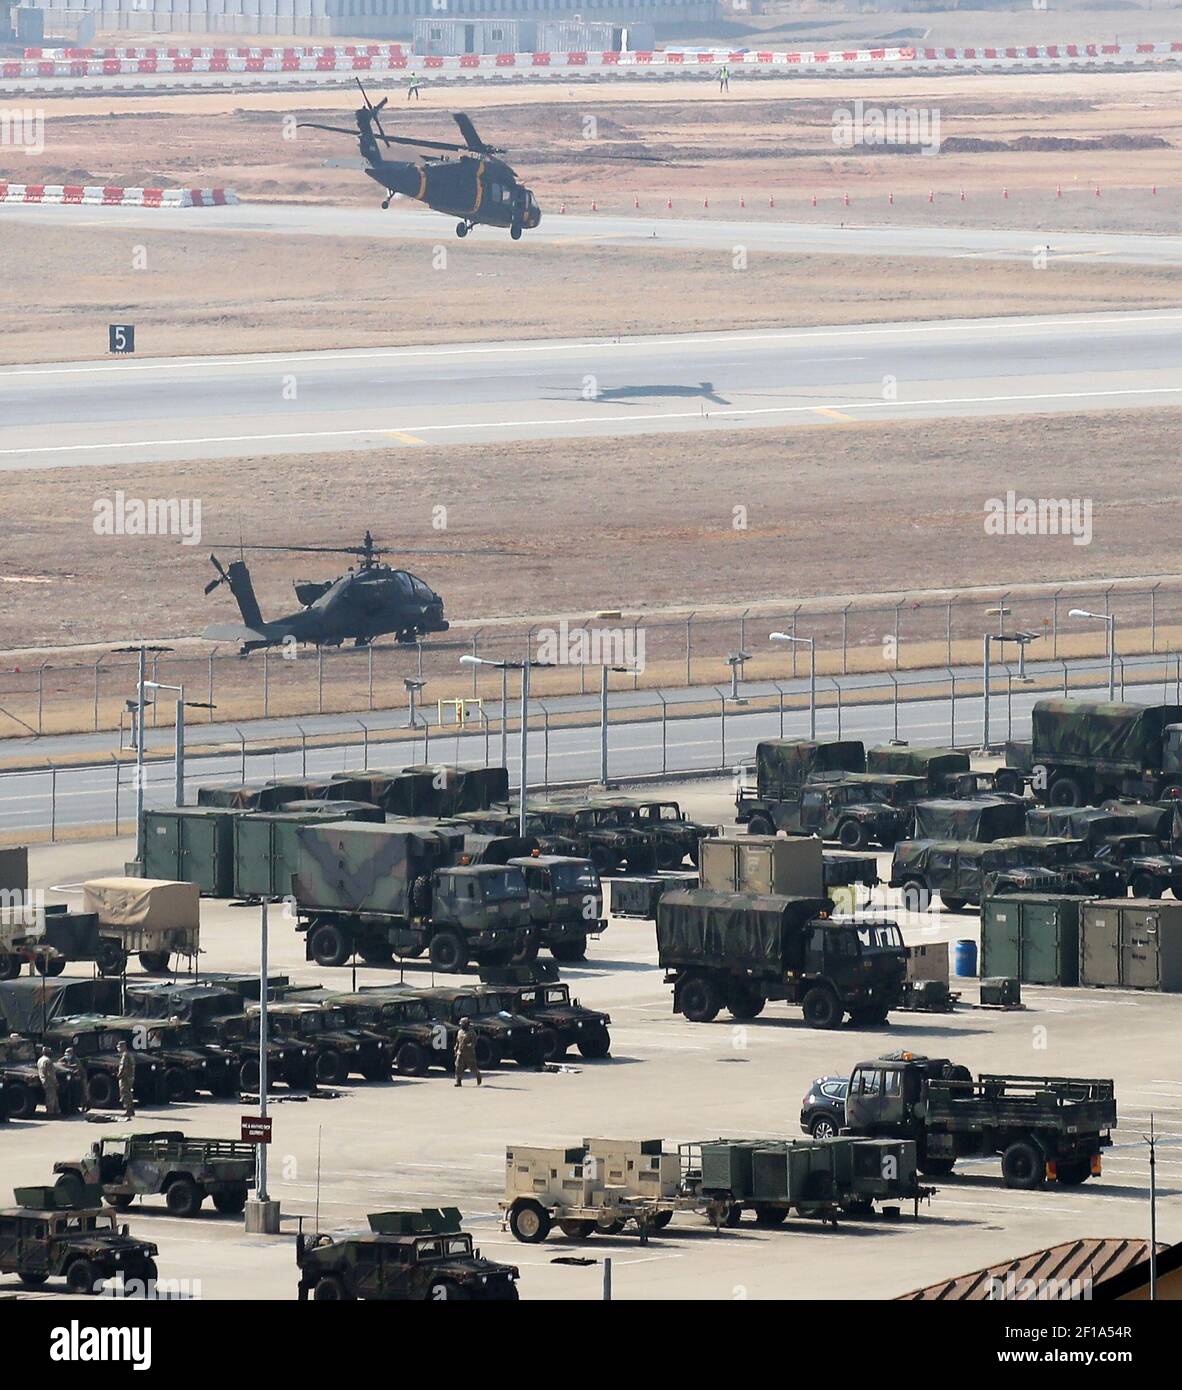 Korea-U.S. joint military drill Seen here is U.S. Army base Camp Humphreys  in Pyeongtaek, 70 km south of Seoul, on March 8, 2021, the first day of the  biannual computer-simulated Combined Command